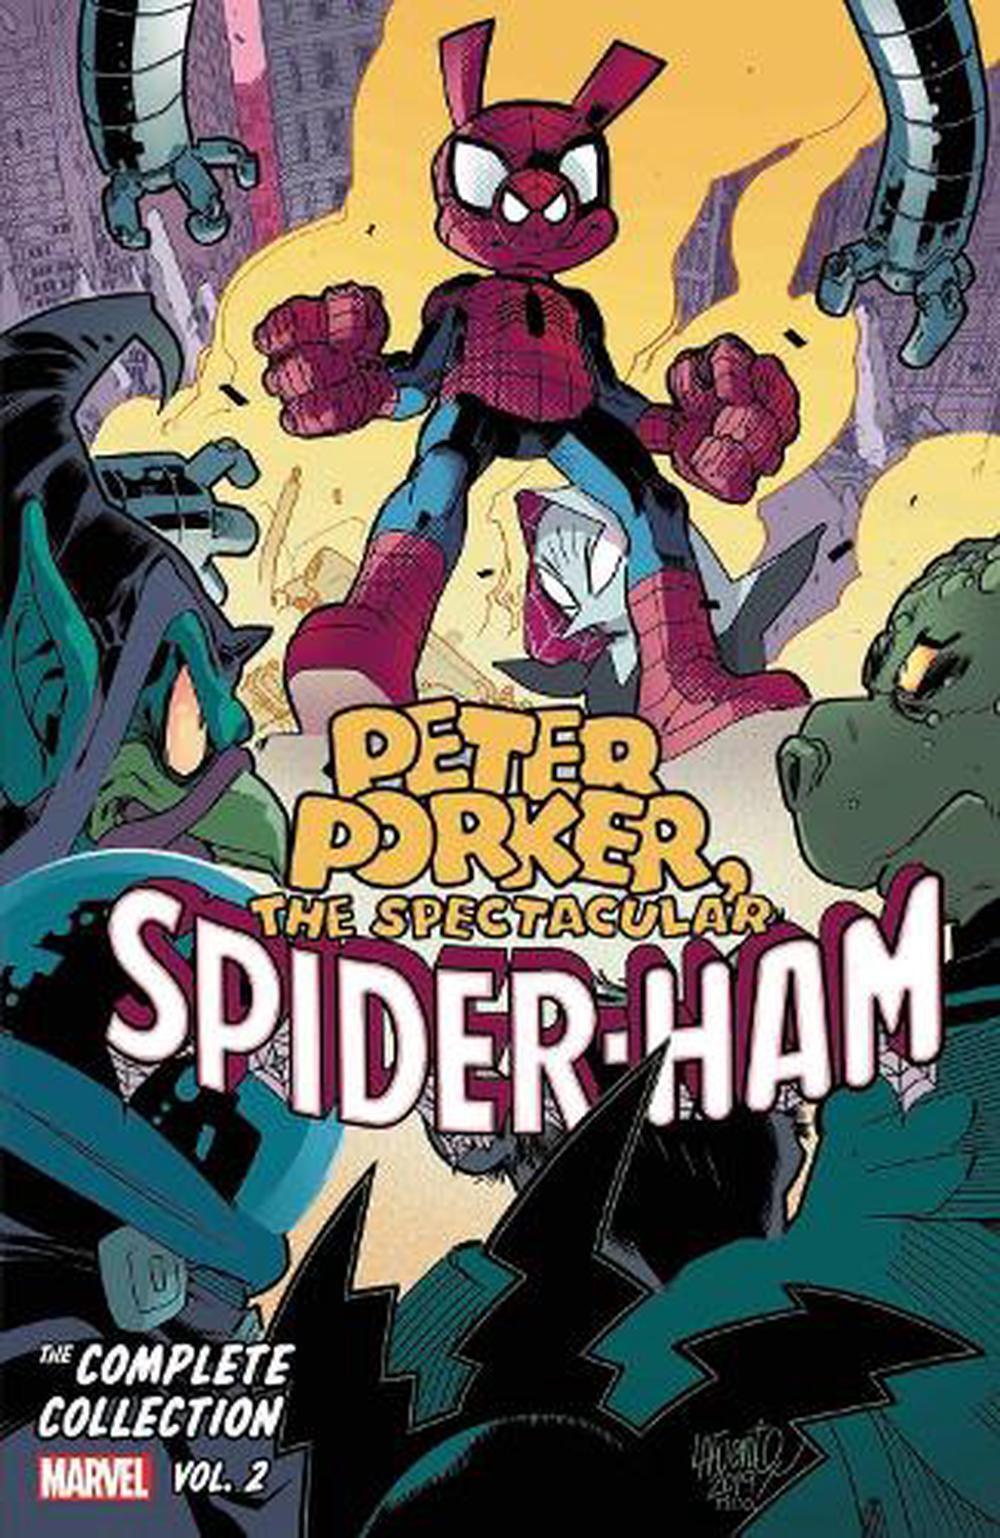 Peter Porker, the Spectacular Spider-ham: the Complete Collection Vol. 2 by Stev